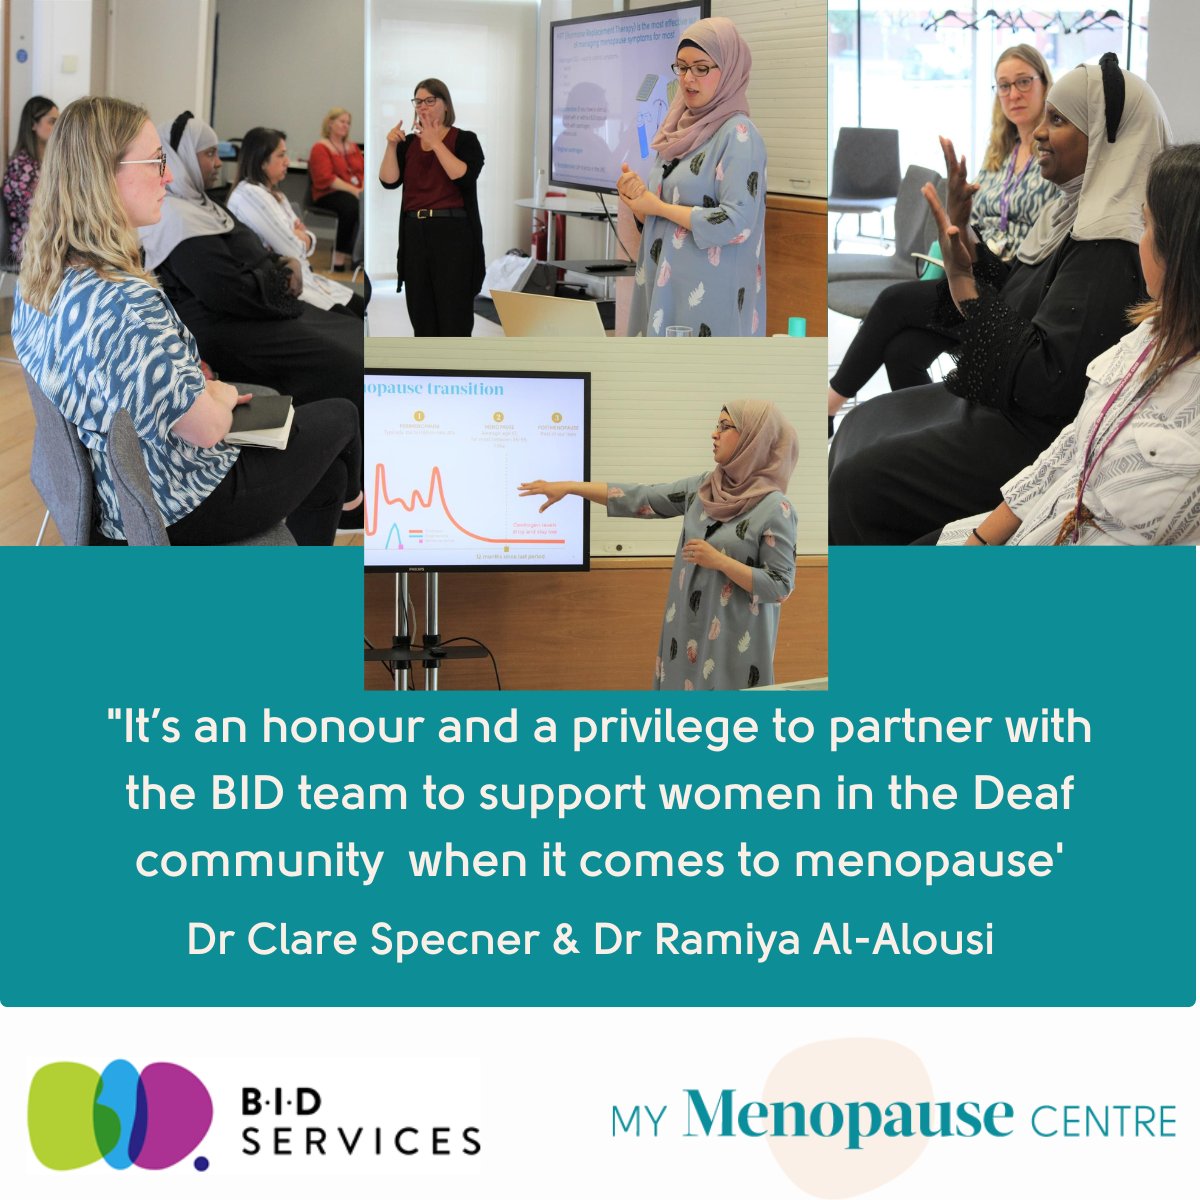 We have teamed up with our charity partner @BIDServices to support them with educational workshops on all things menopause, helping to empower women who are deaf, hard of hearing, sight impaired, or deaf-blind through in person, inclusive and accessible learning. 😍